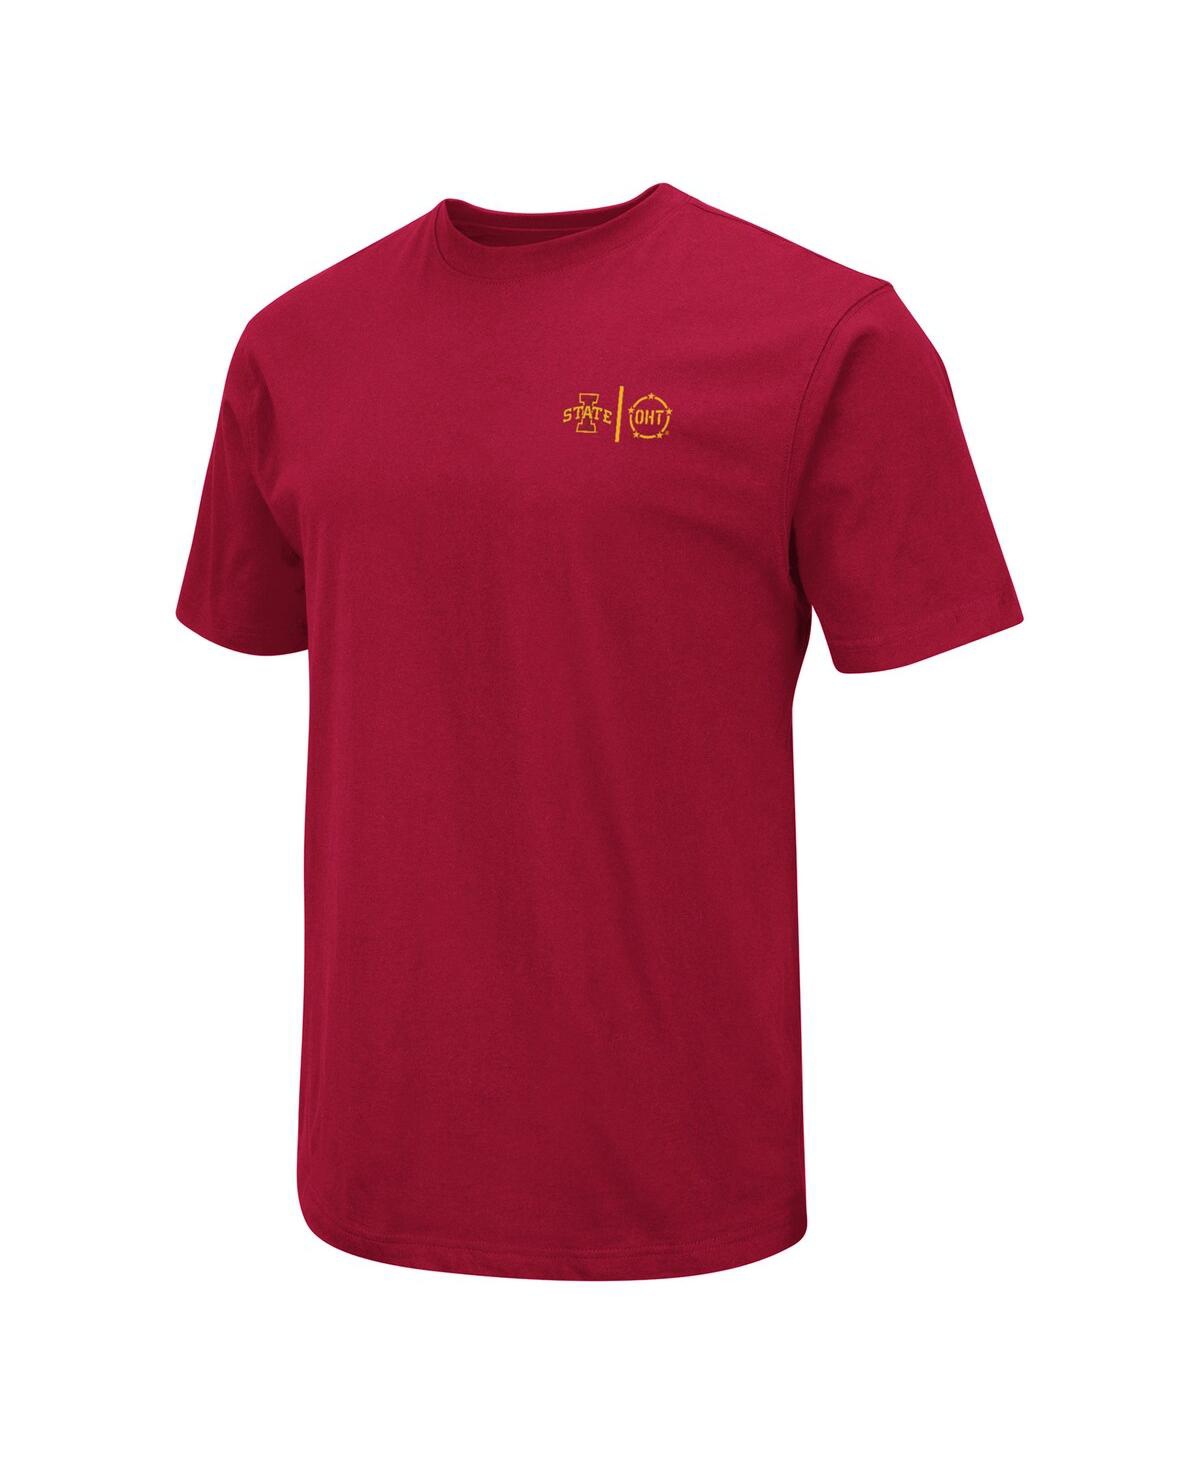 Shop Colosseum Men's  Cardinal Iowa State Cyclones Oht Military-inspired Appreciation T-shirt